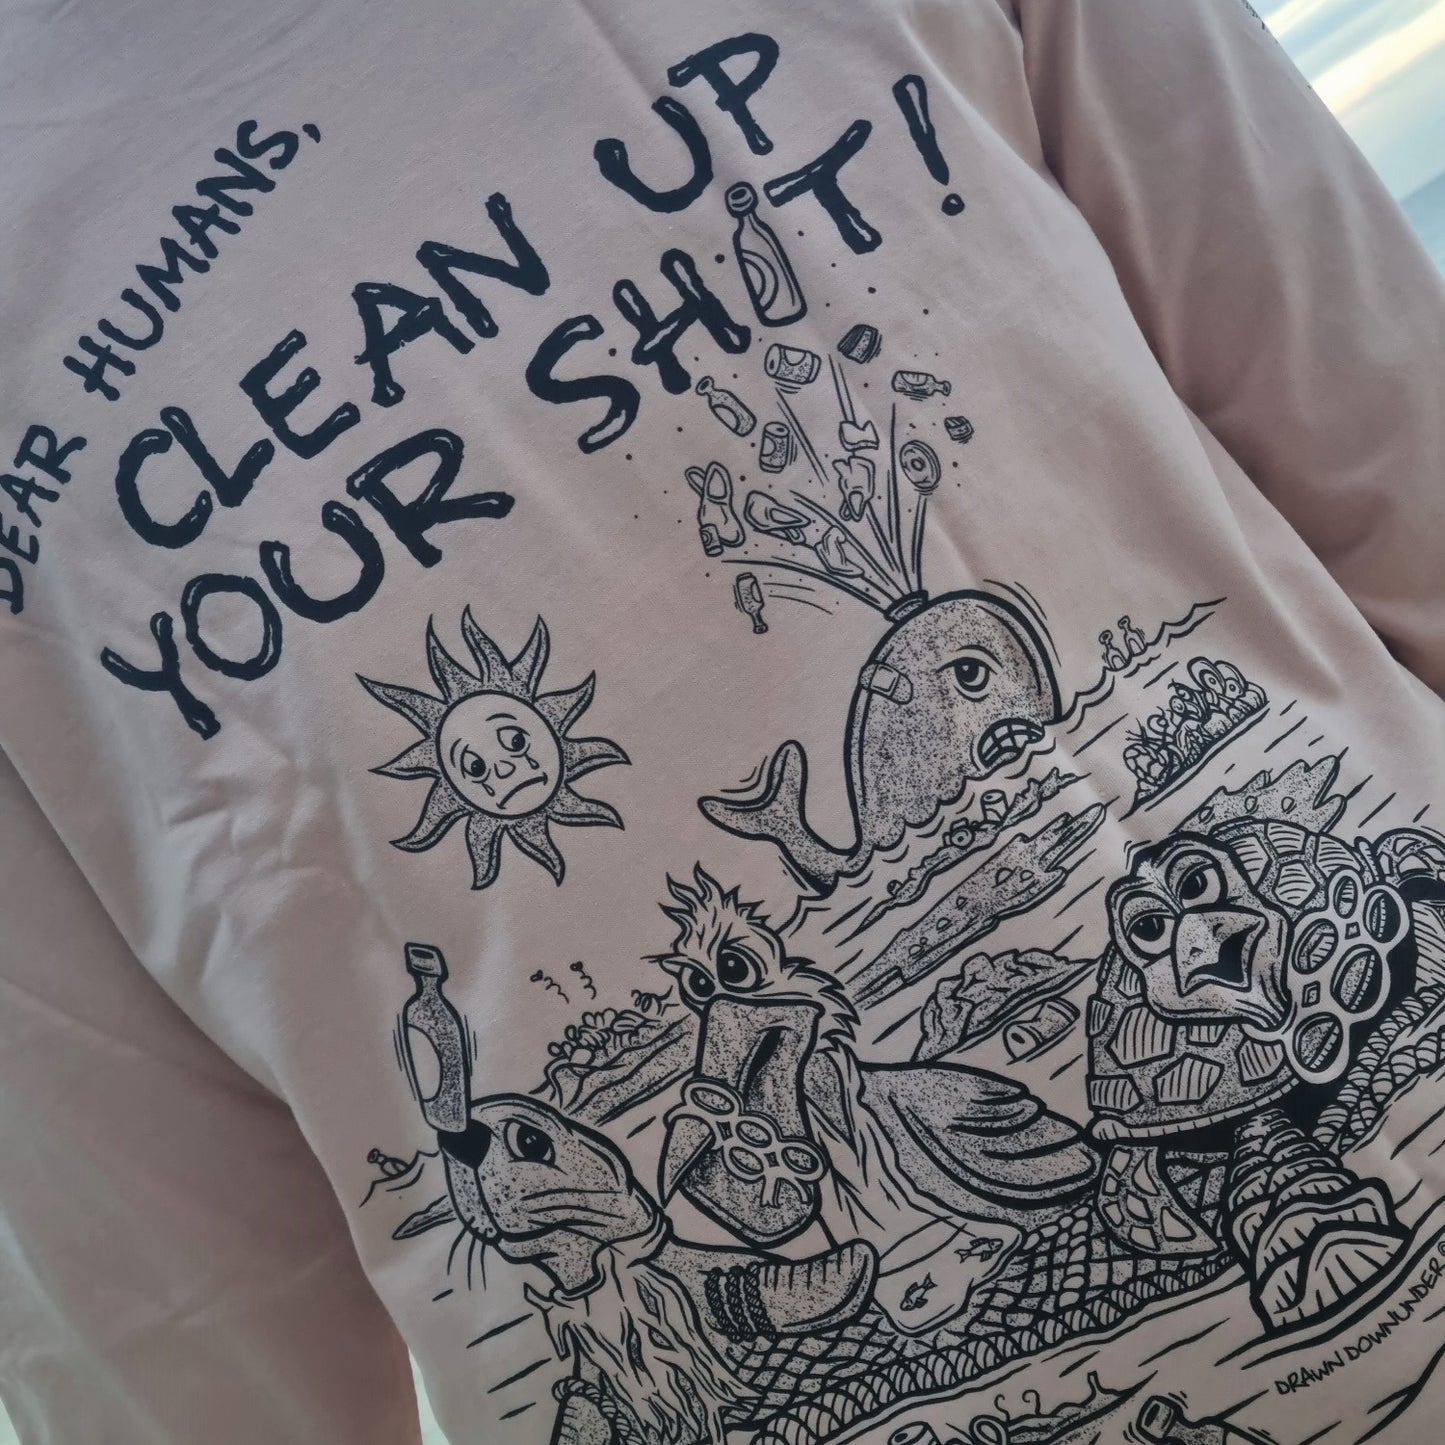 Clean Up Your Sh!t Long Sleeve